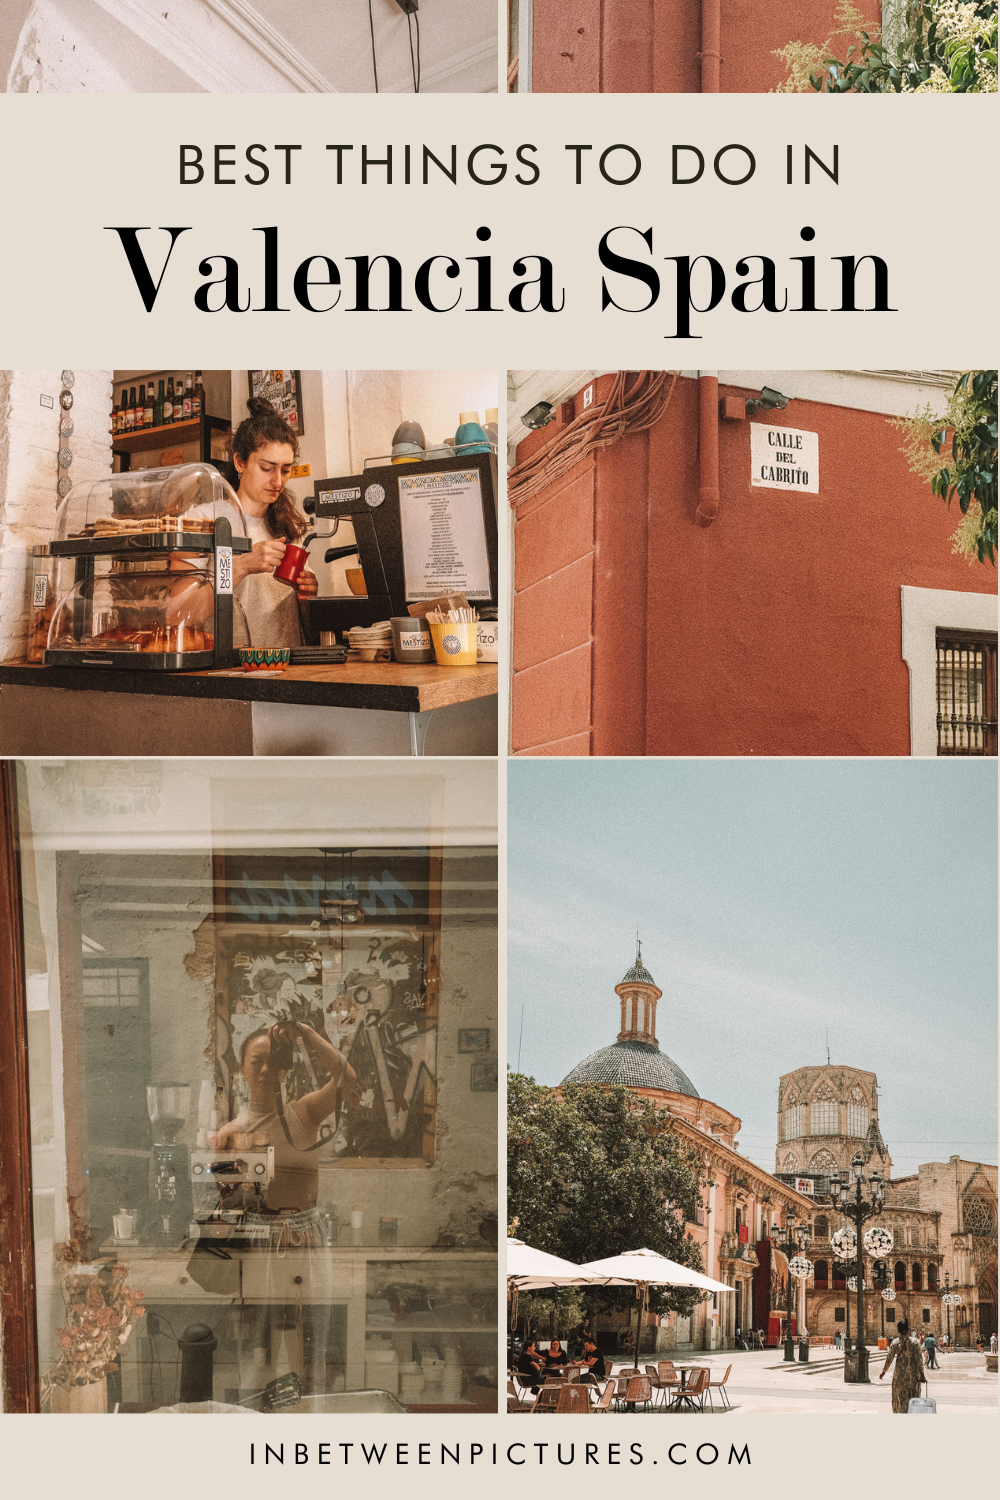 3 Days in Valencia Itinerary - Perfect 3-day Itinerary in Valencia Spain, Top things to do in Valencia, Where to eat in Valencia, What to do in Valencia, Food guide to Valencia